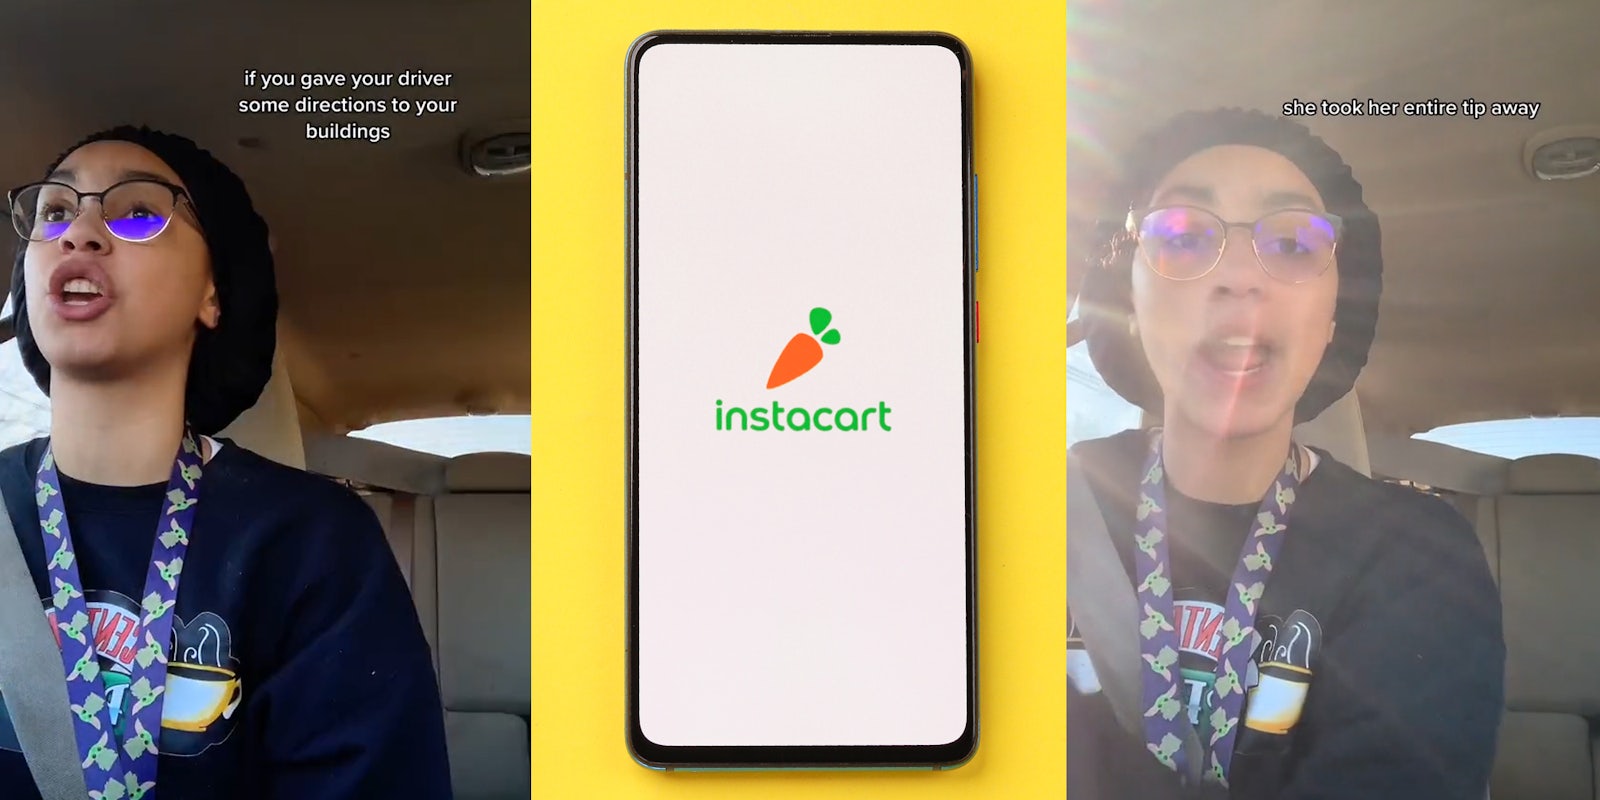 Instacart shopper speaking with caption 'if you gave your driver some directions to your buildings' (l) Instacart on phone screen on yellow background (c) Instacart shopper speaking with caption ' she took her entire tip away' (r)